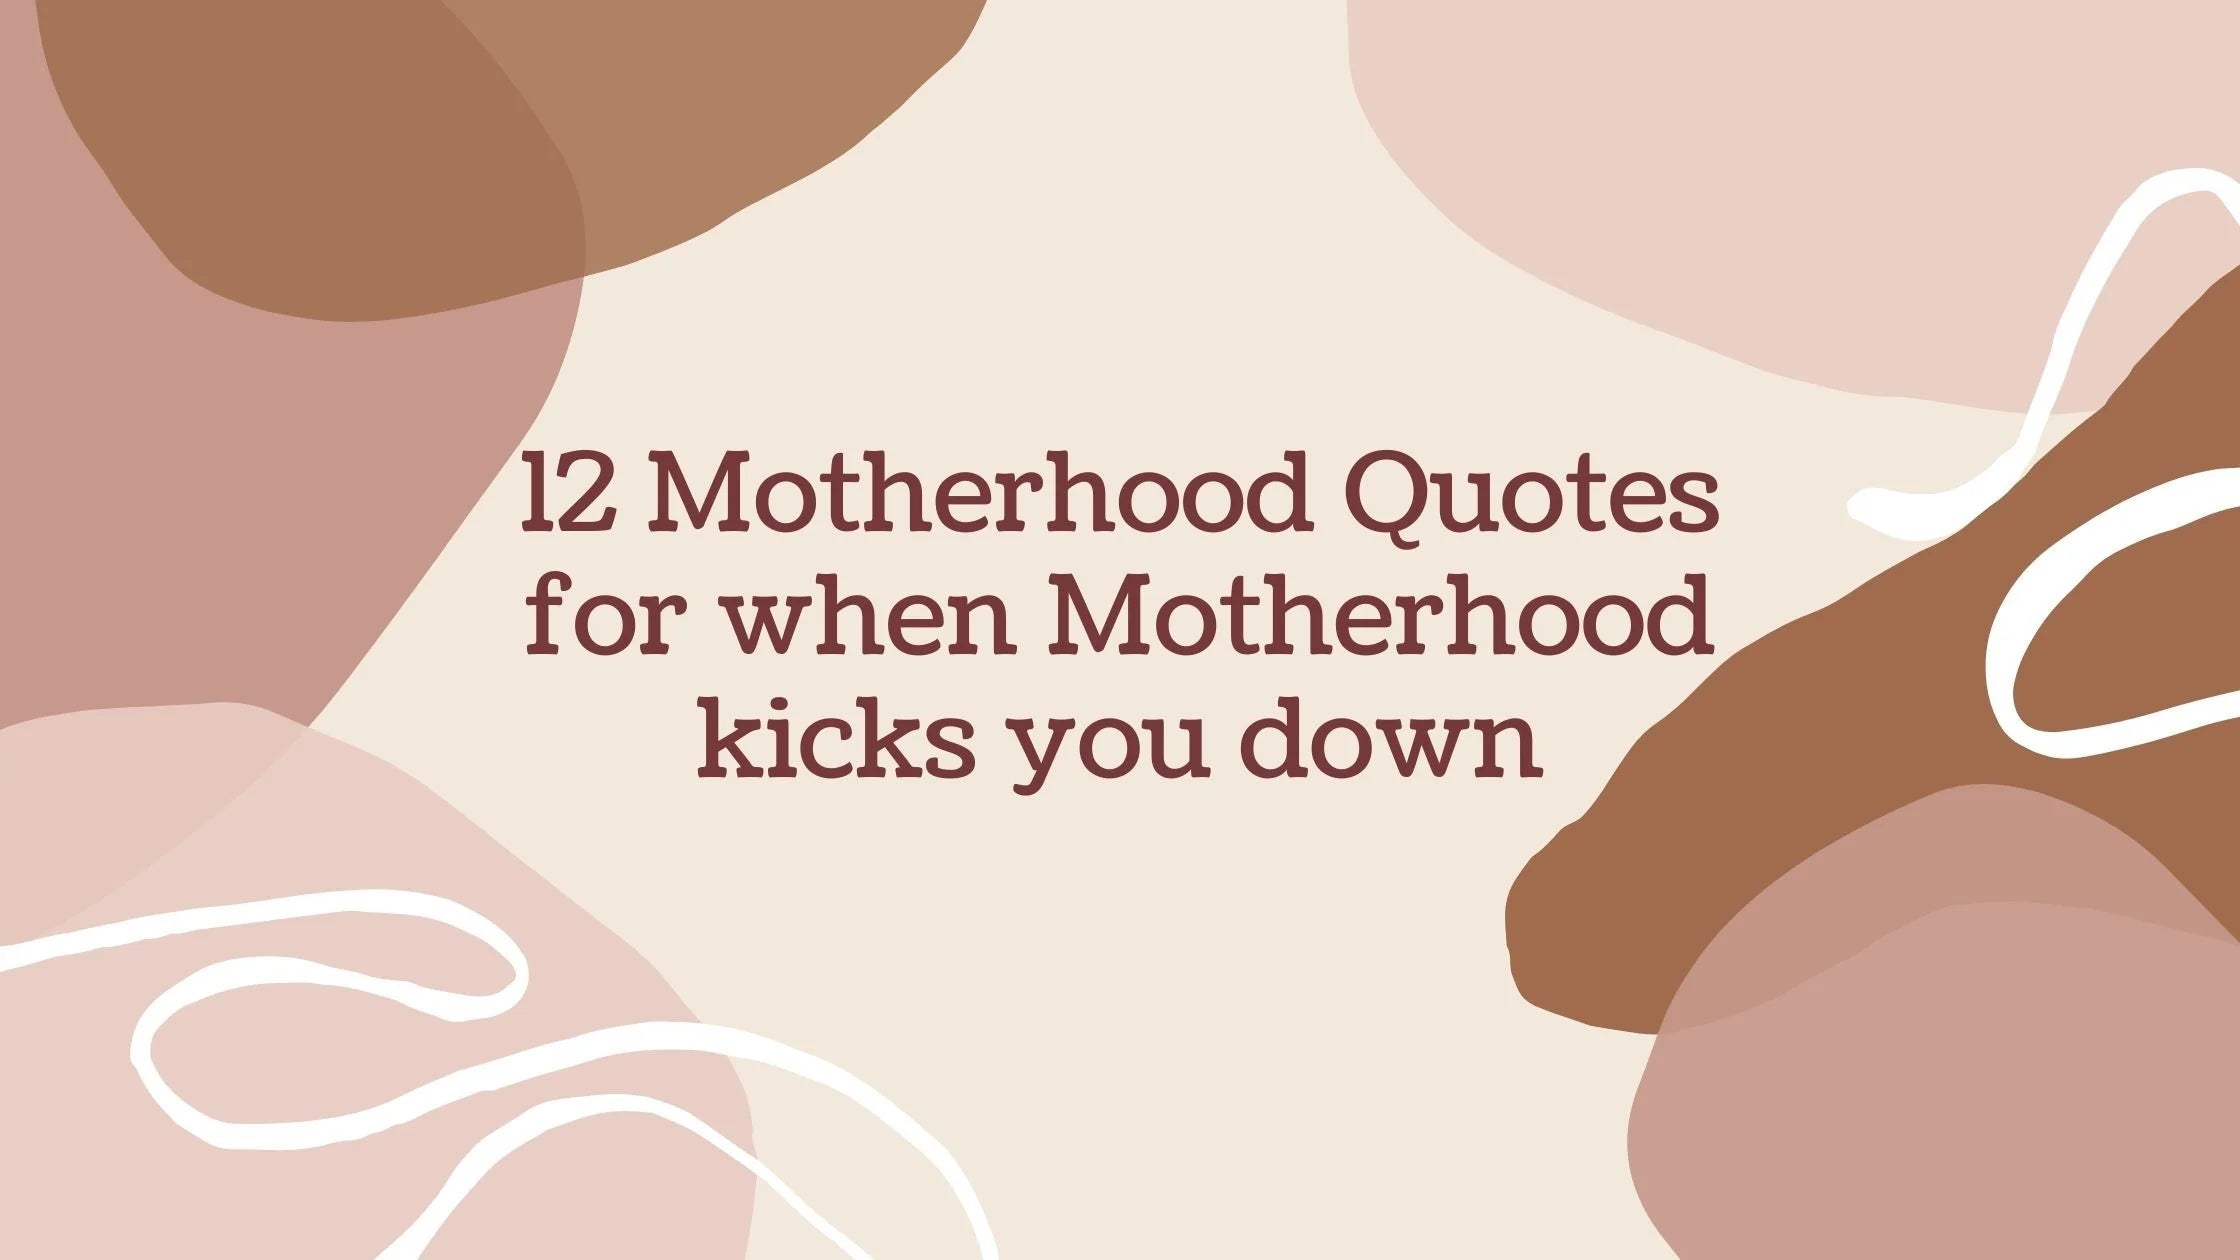 Useful Maternity Quotes to Share